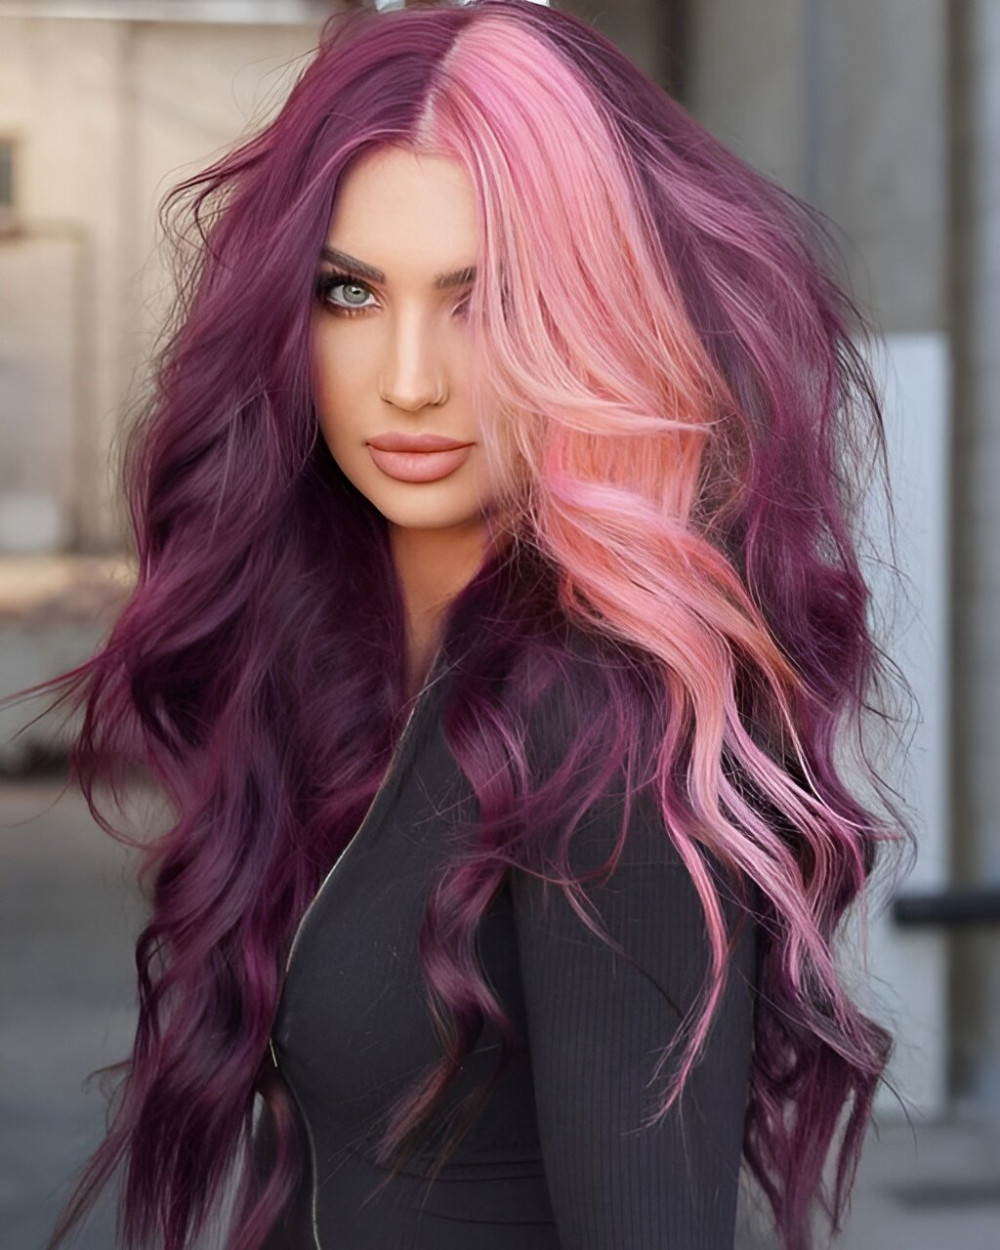 Become A Model With These 27 Gorgeous Plum Hair Color Ideas - 185